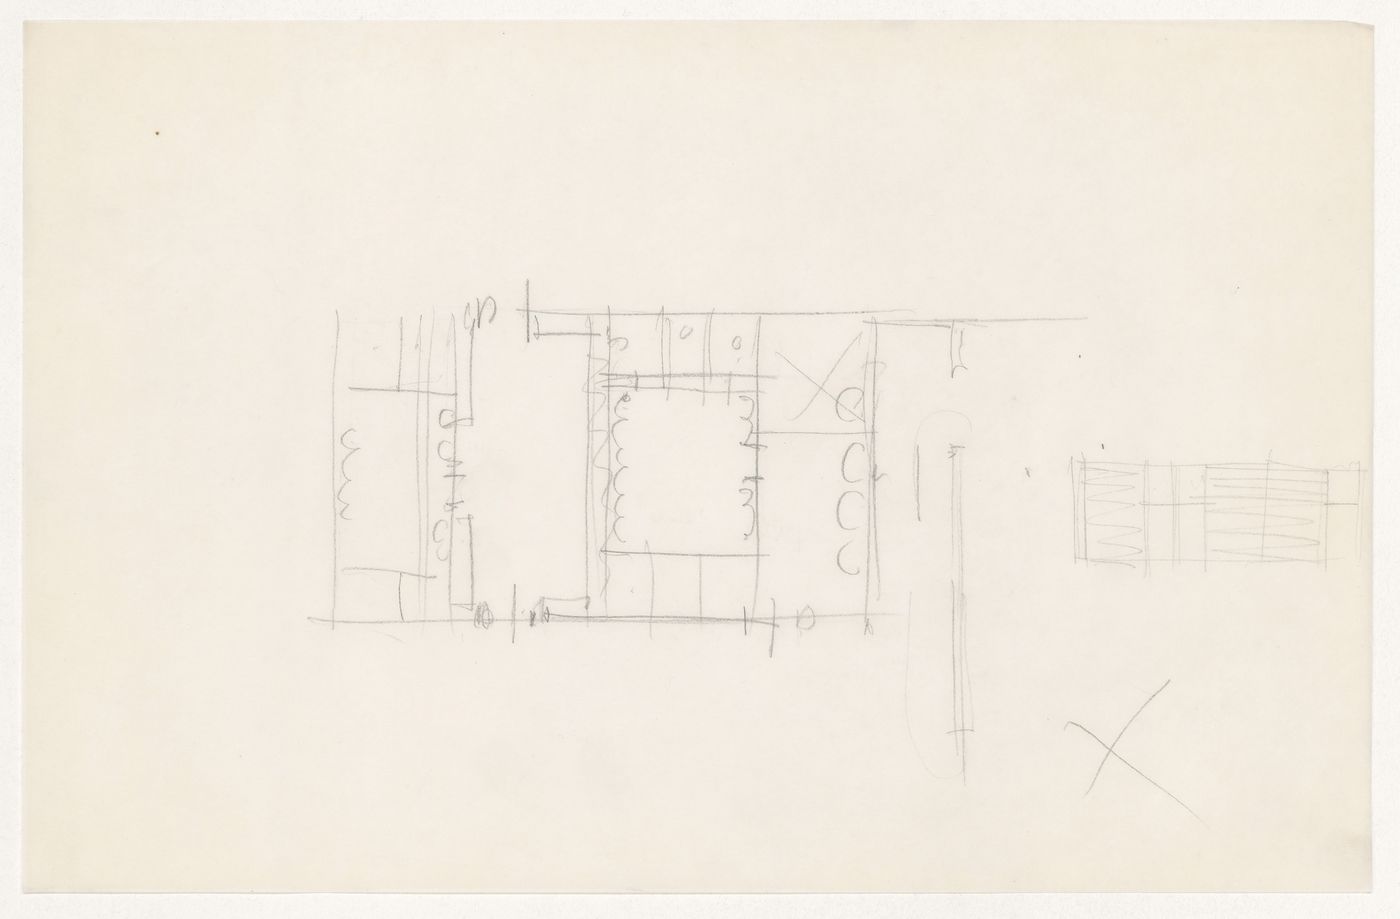 Partial sketch plan and partial sketch elevation for the Metallurgy Building, Illinois Institute of Technology, Chicago